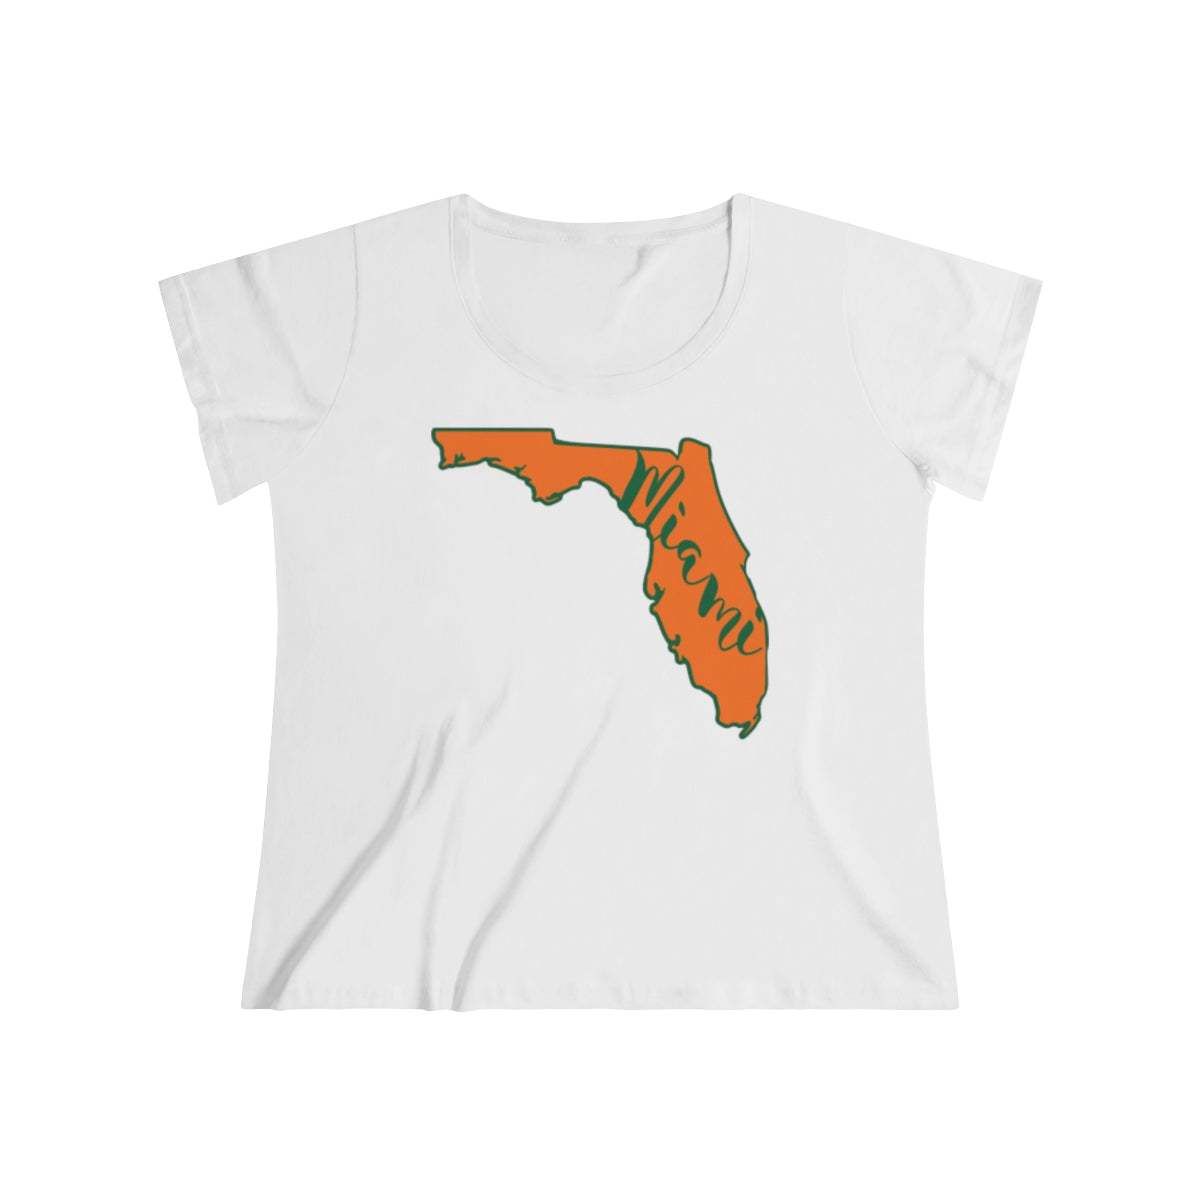 Miami Hurricanes Inspired State Outline Women's Curvy Tee